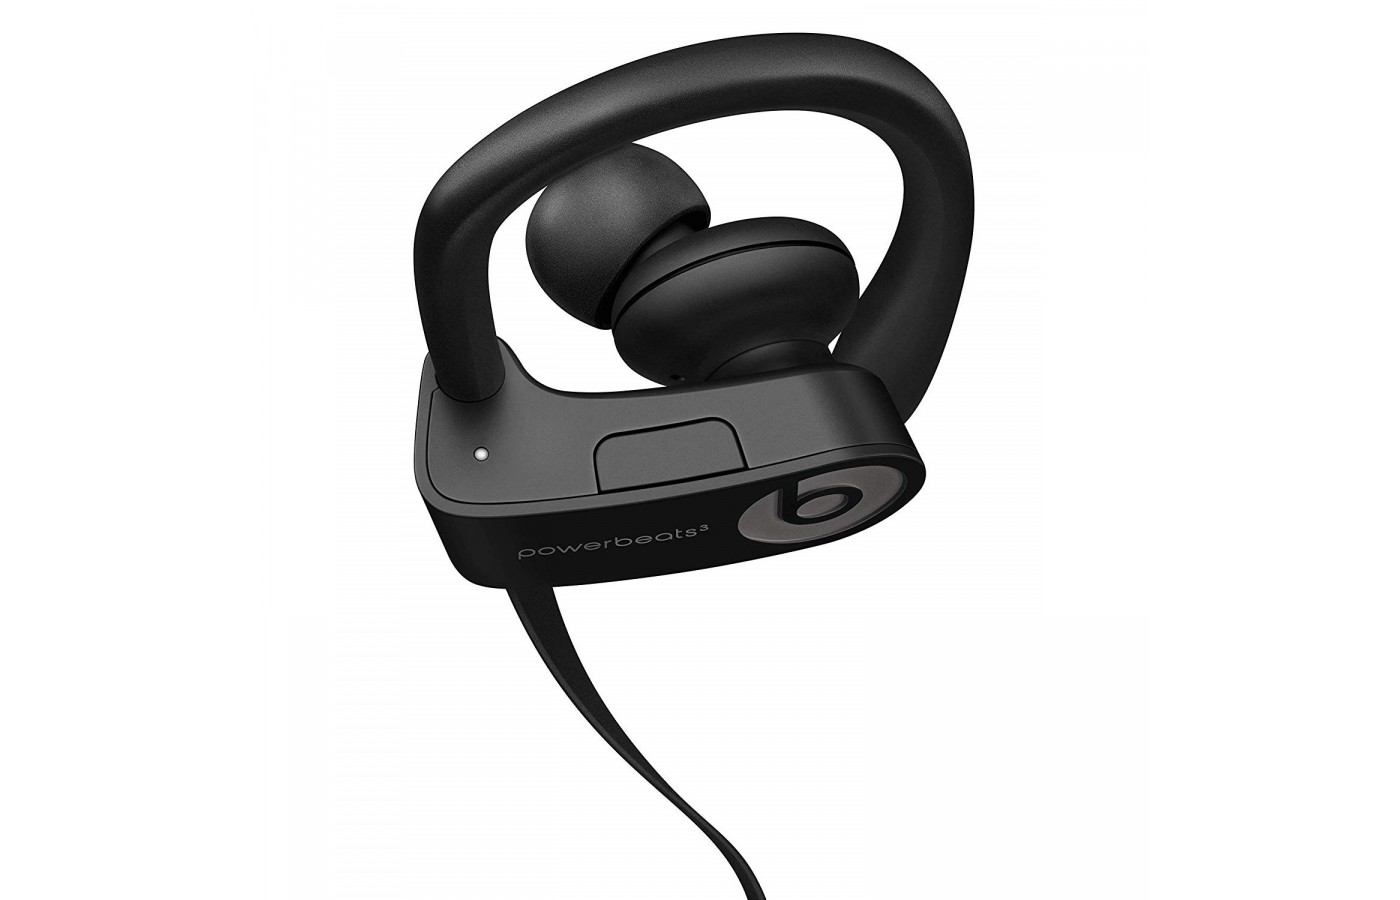 The Beats Powerbeats 3 have a low power light on the earphone themselves to let the wearer know when to recharge them.